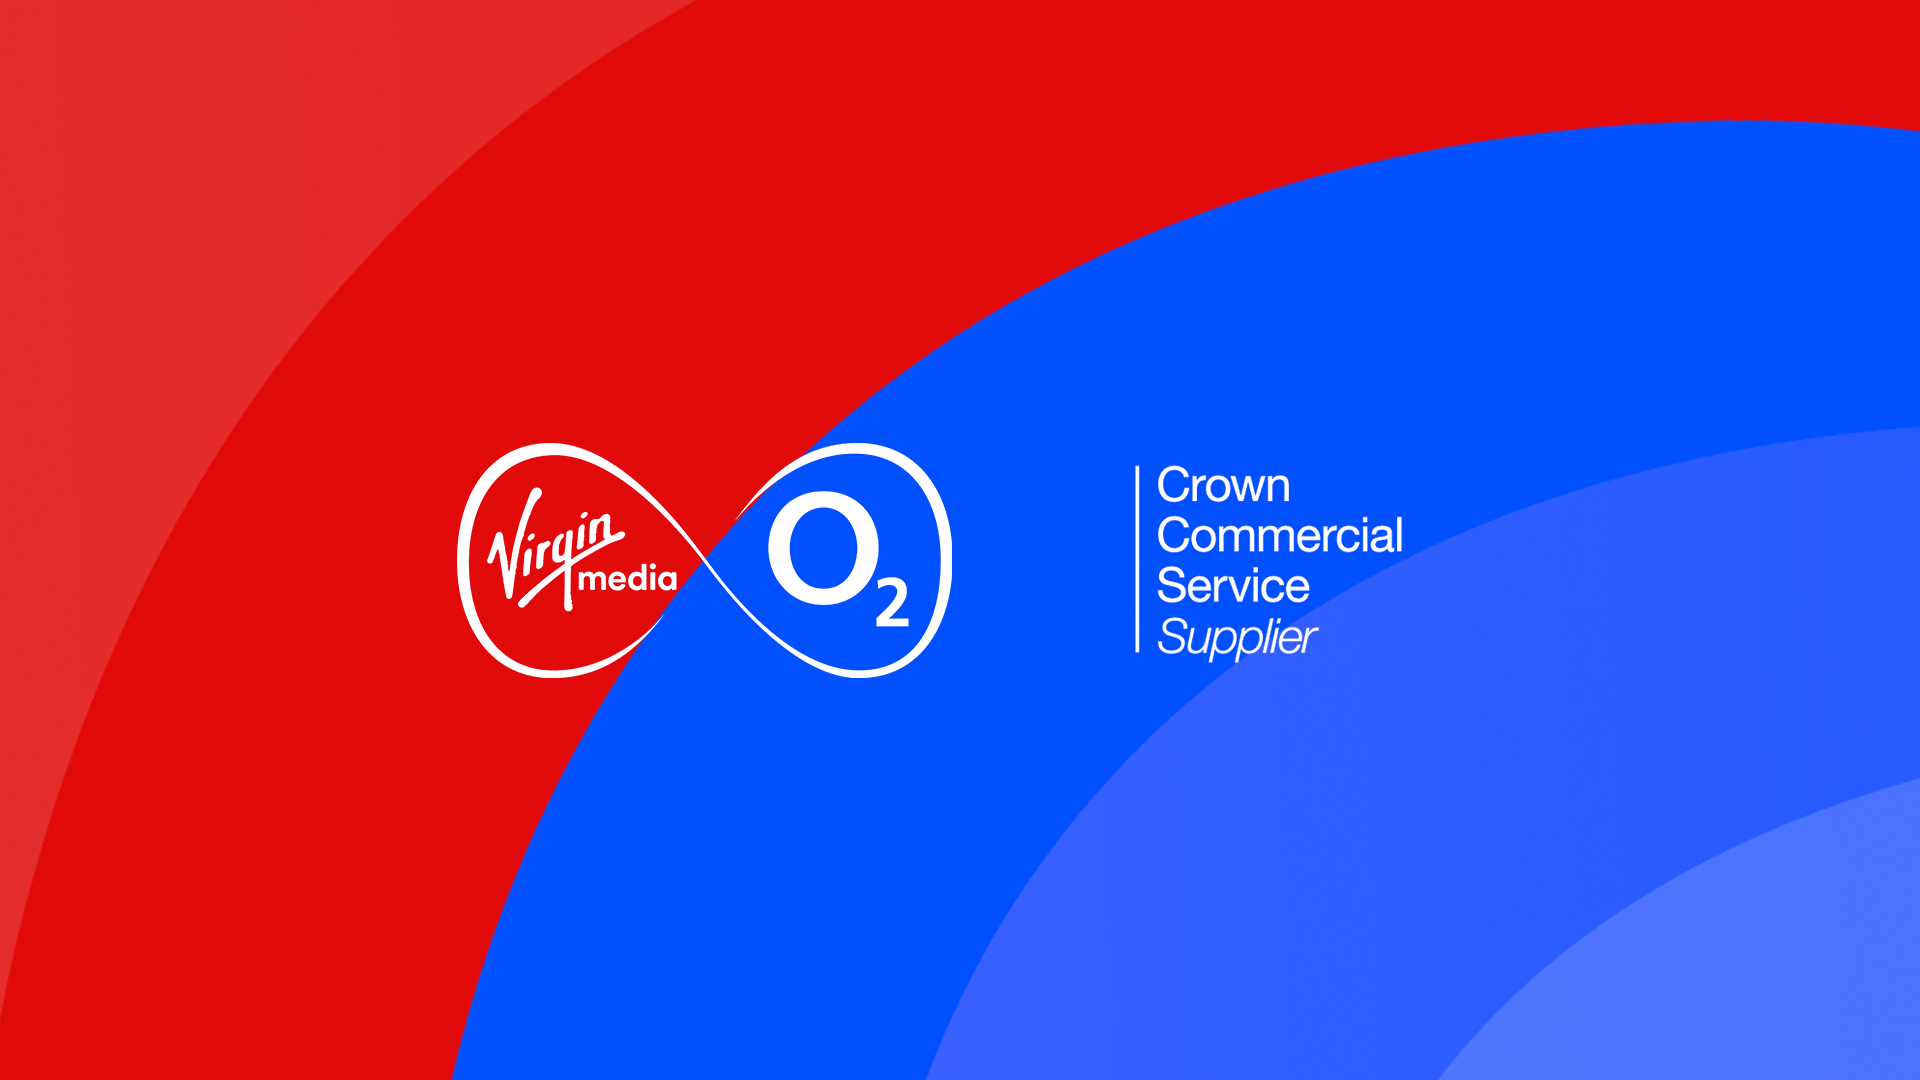 Virgin Media O2 Business and Crown Commercial Service join forces to accelerate digital transformation in UK public sector – Virgin Media O2